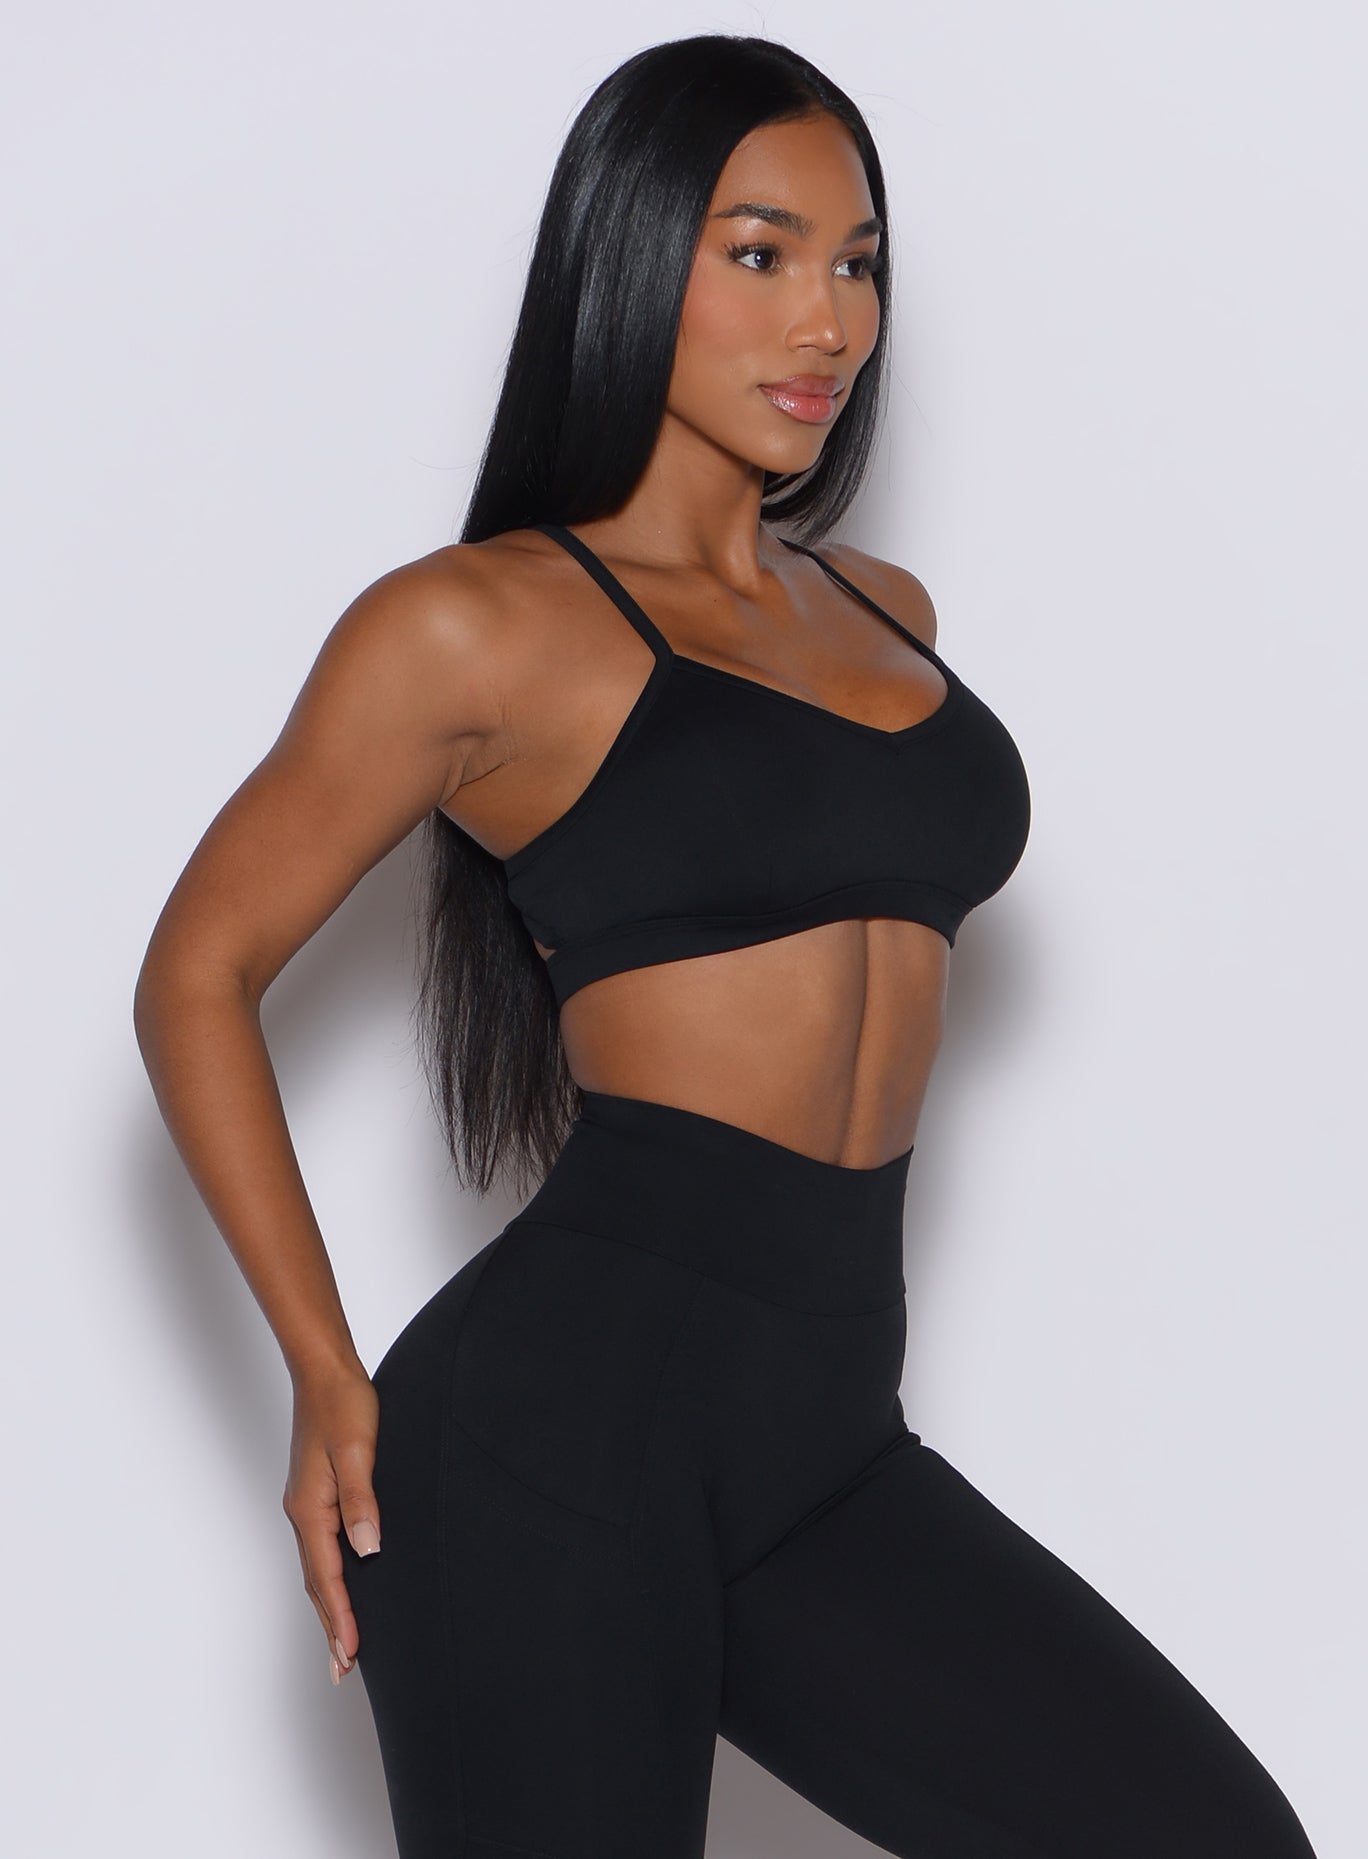 Right side profile of a model wearing our black diamond sports bra and a matching leggings